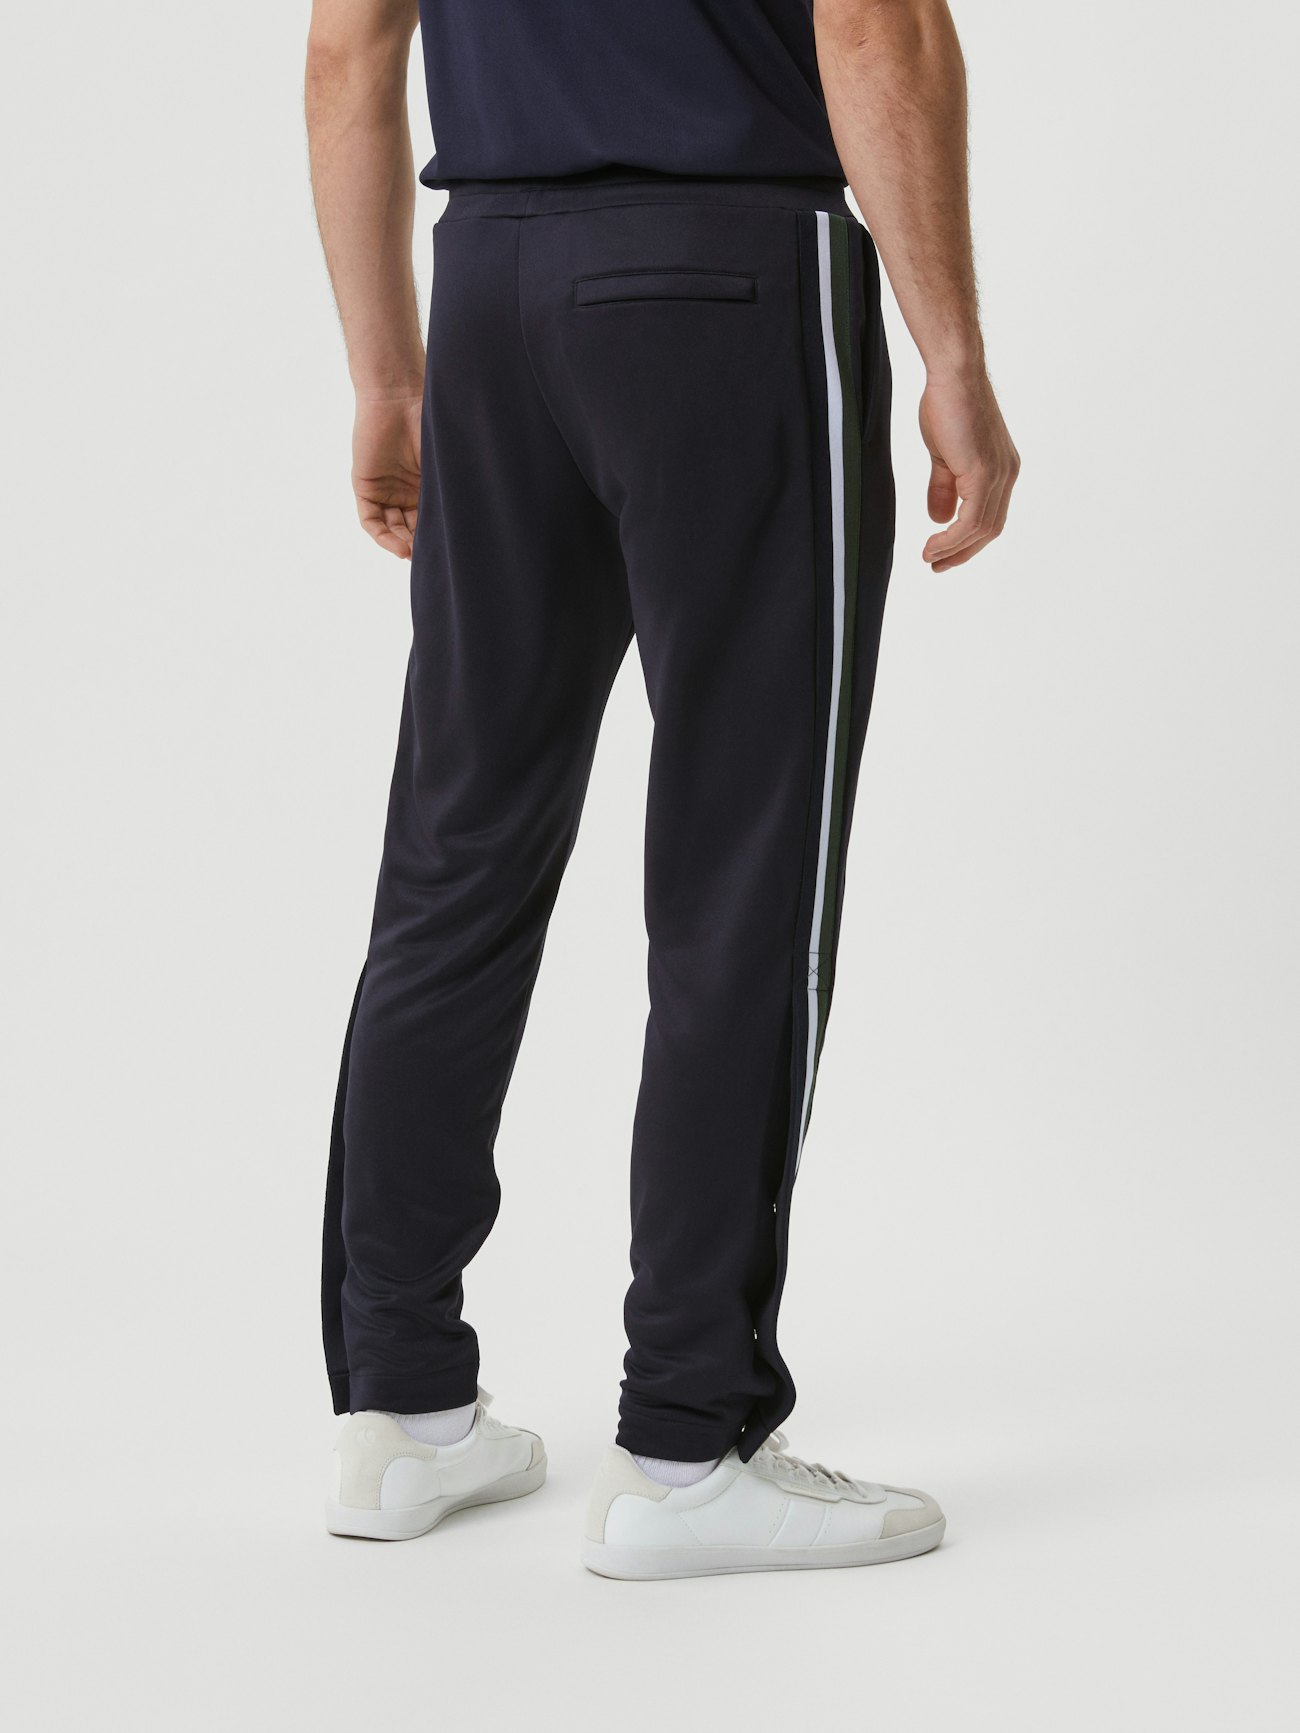 Ace Tapered Pants - Night sky